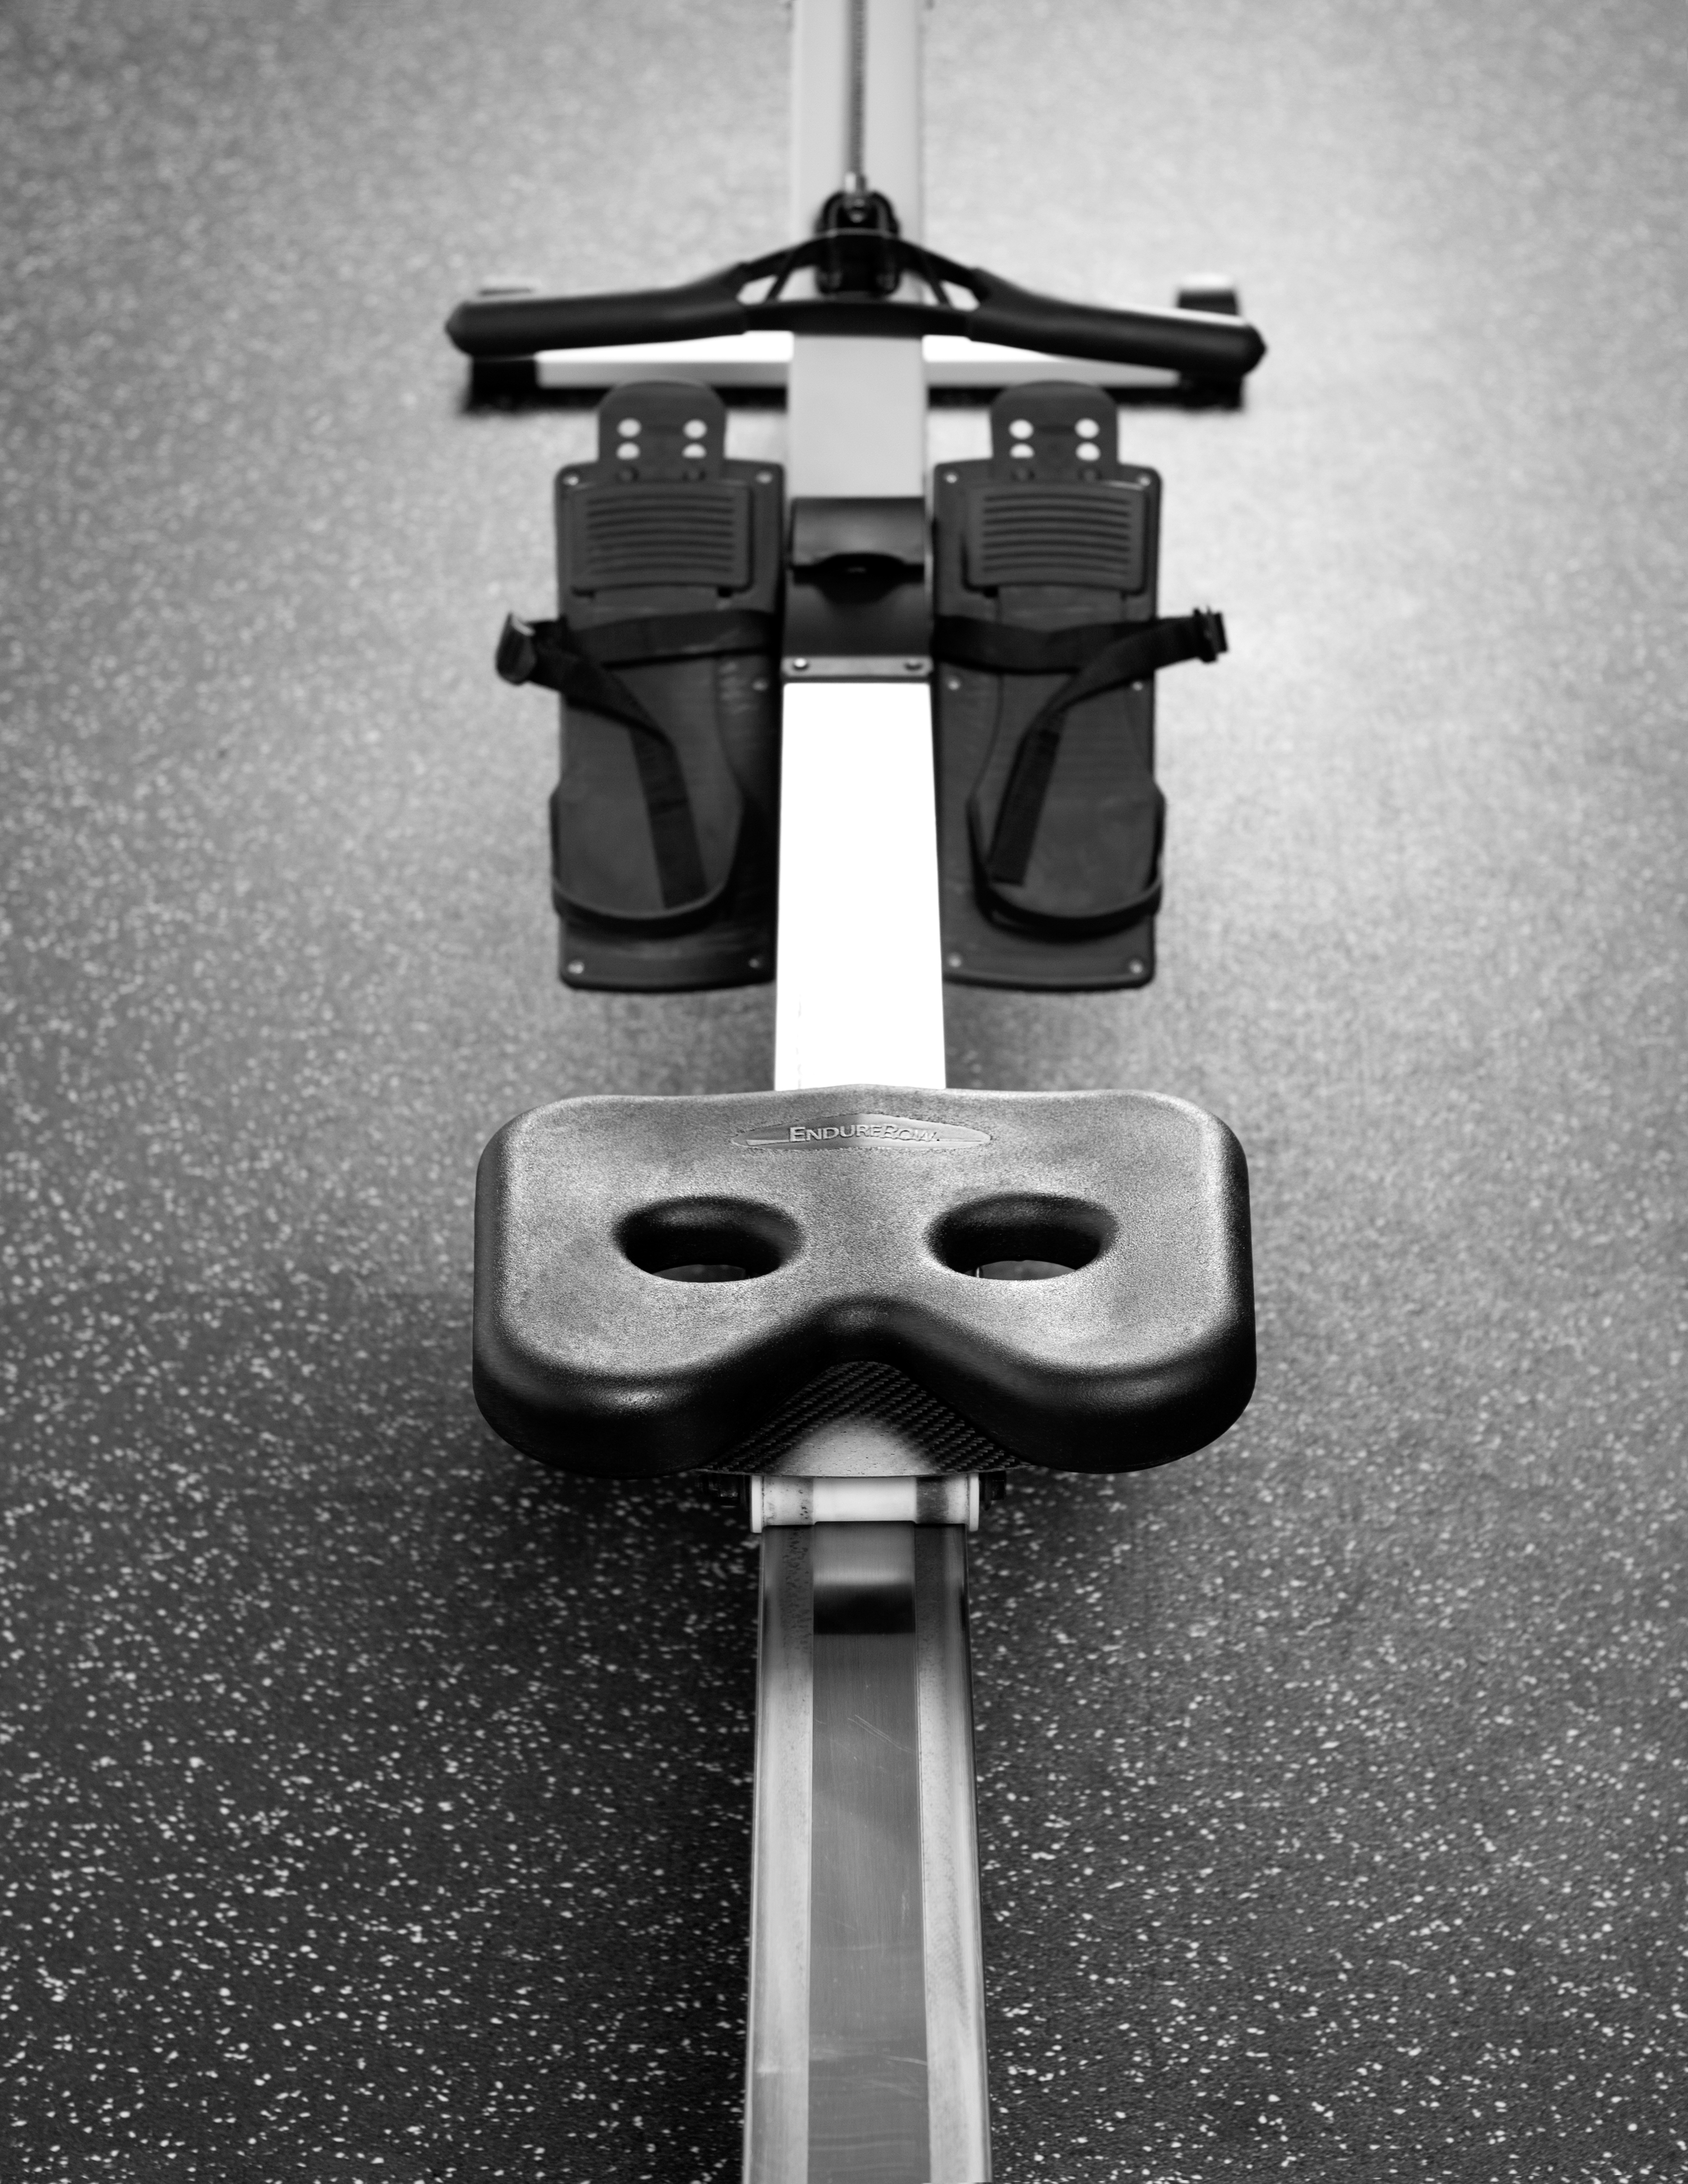 EndureRow seat for use Concept2® rowing with machines